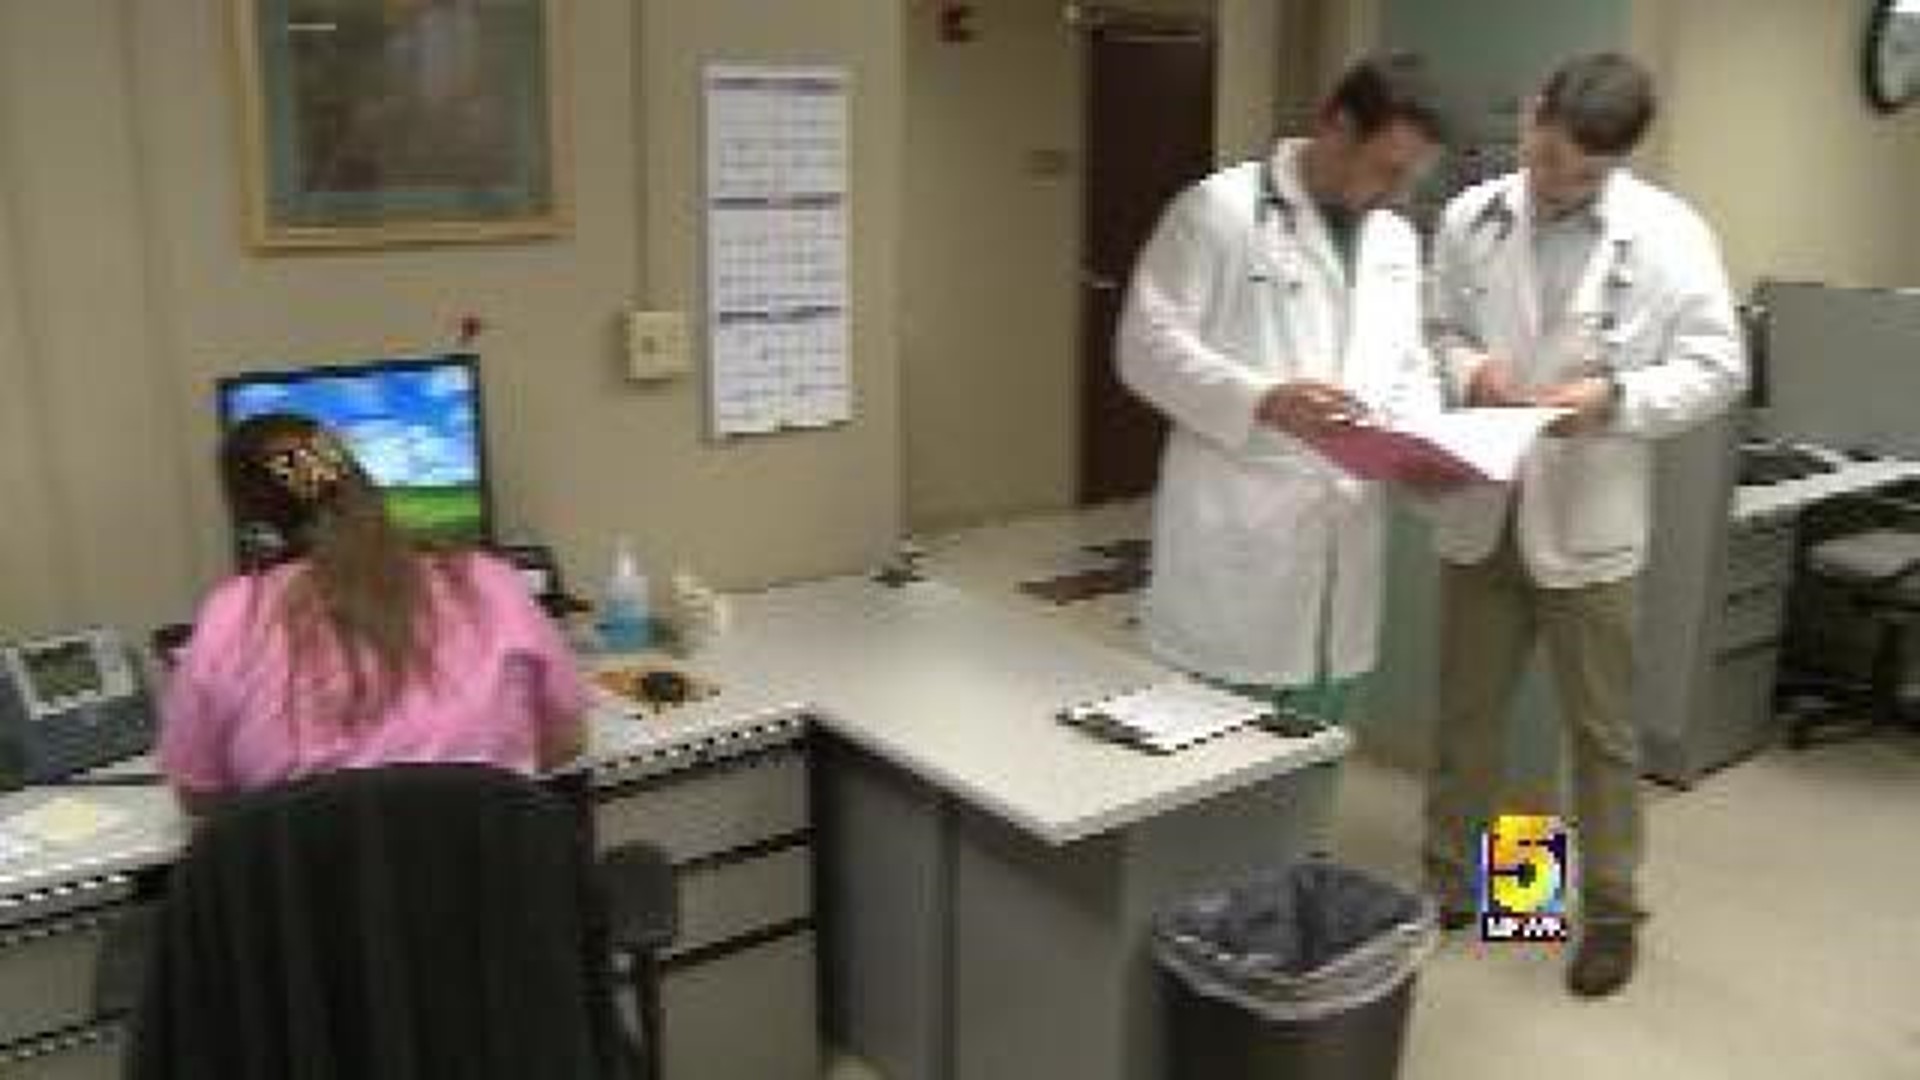 Affordable Care Act Application Will Open for Arkansans